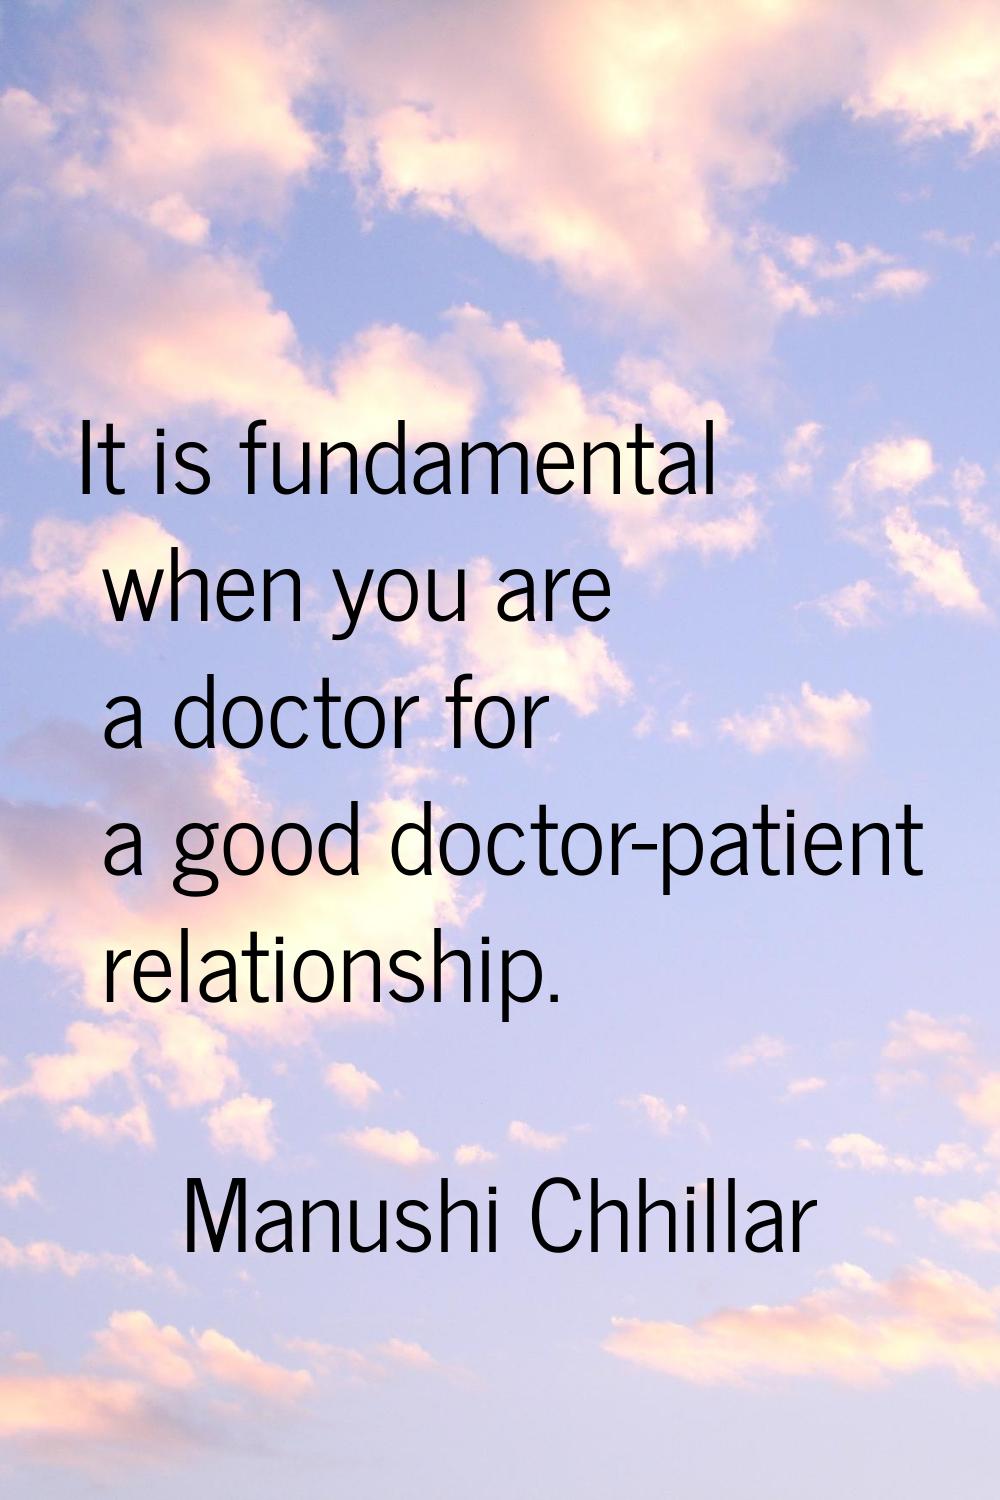 It is fundamental when you are a doctor for a good doctor-patient relationship.